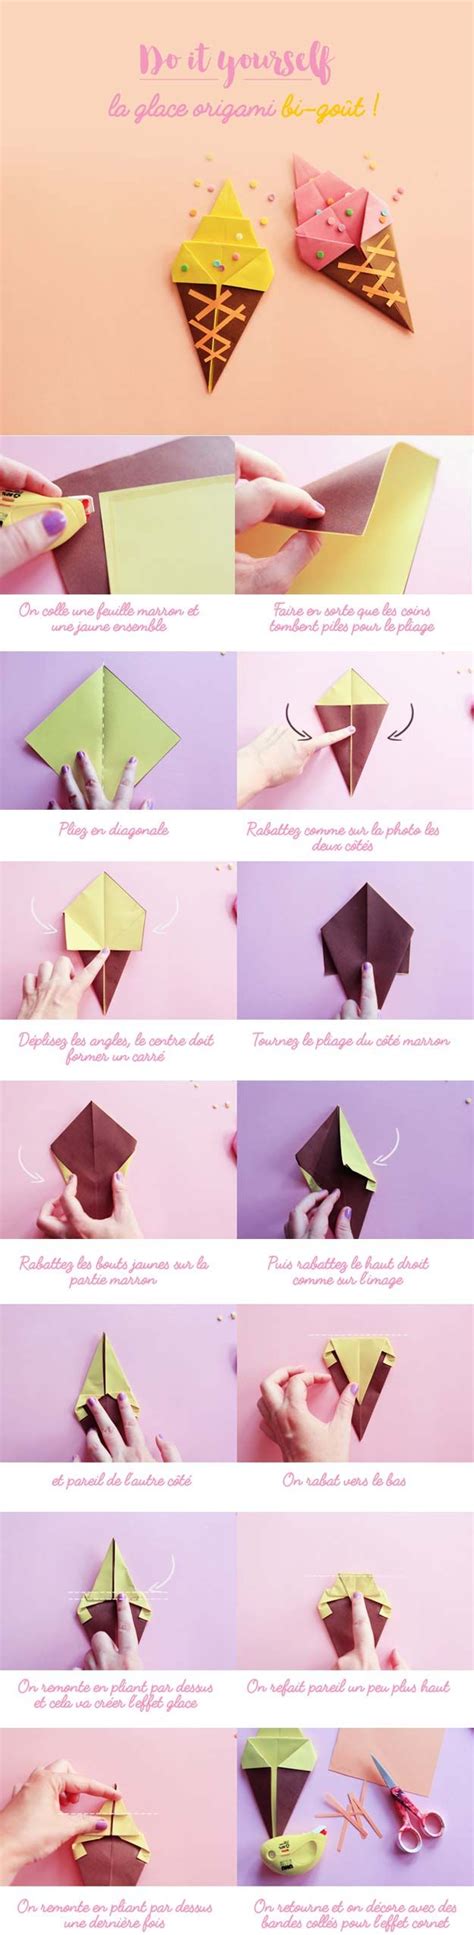 40 Best Diy Origami Projects To Keep You Entertained Today In 2020